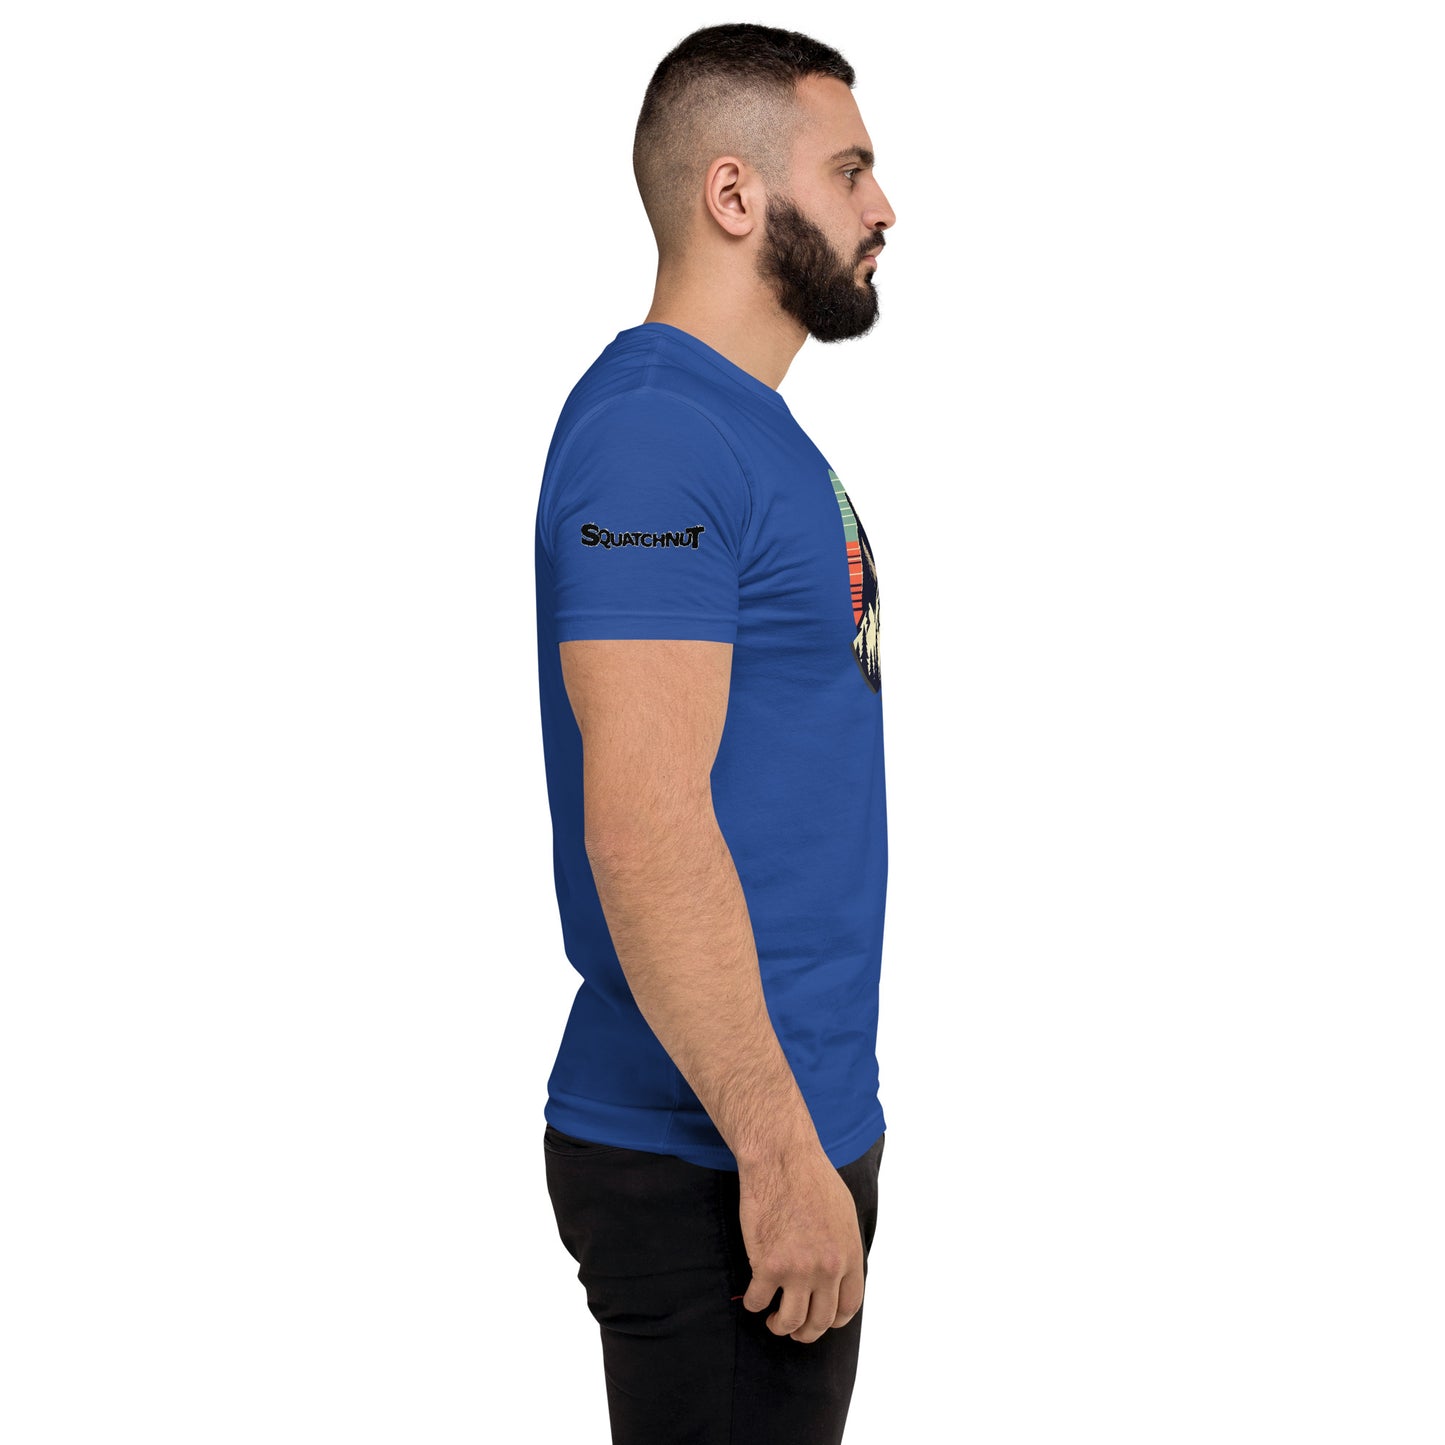 Look out Short Sleeve T-shirt